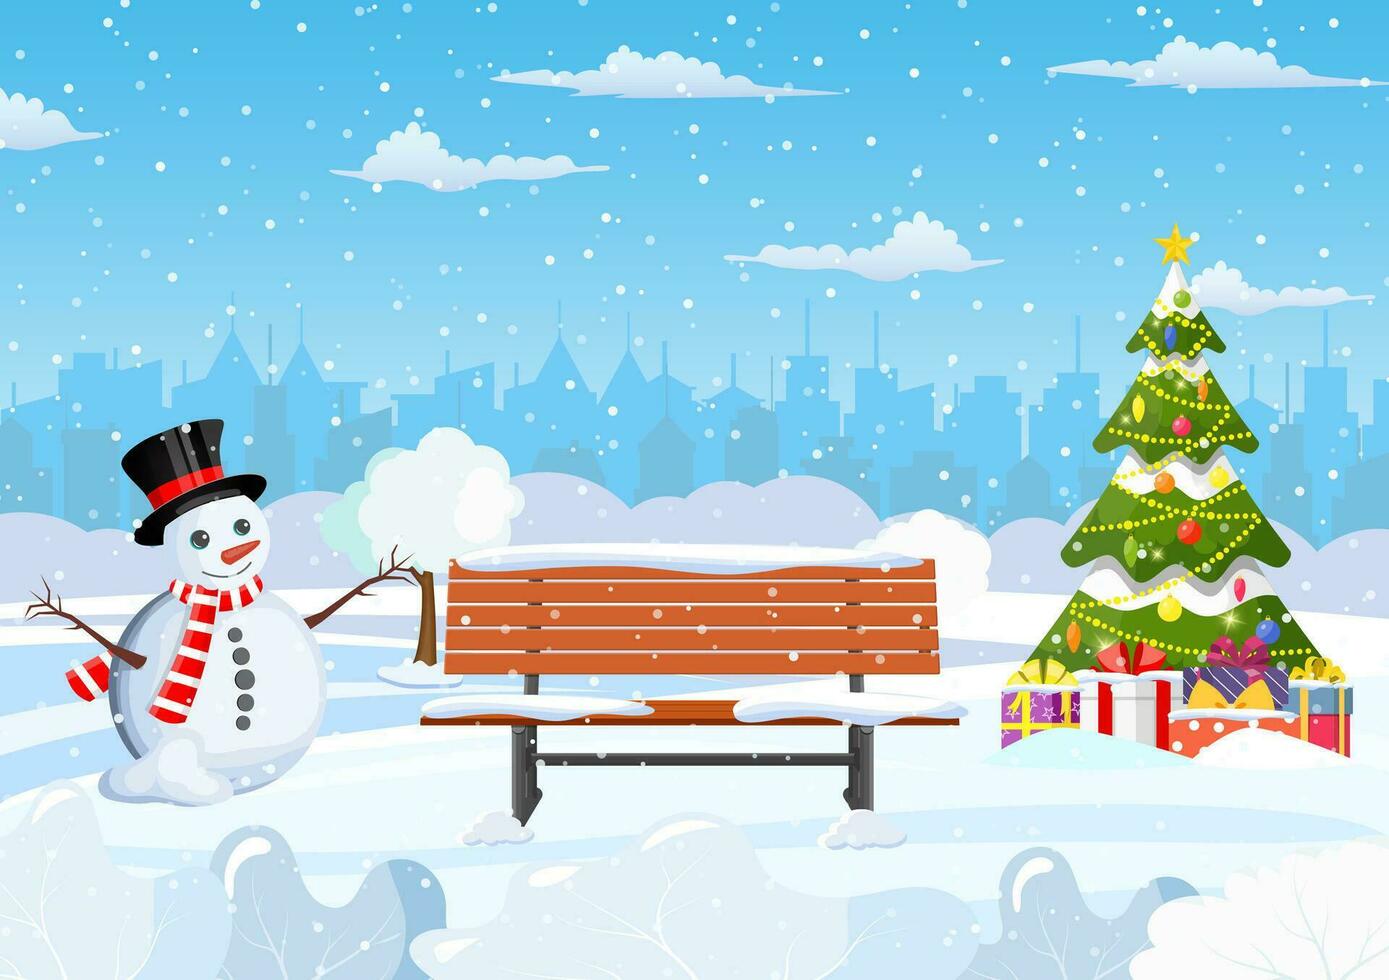 snowy winter city park with Christmas trees, bench, snowman and city skyline. Winter Christmas landscape for banner, poster, web. Vector illustration in flat style